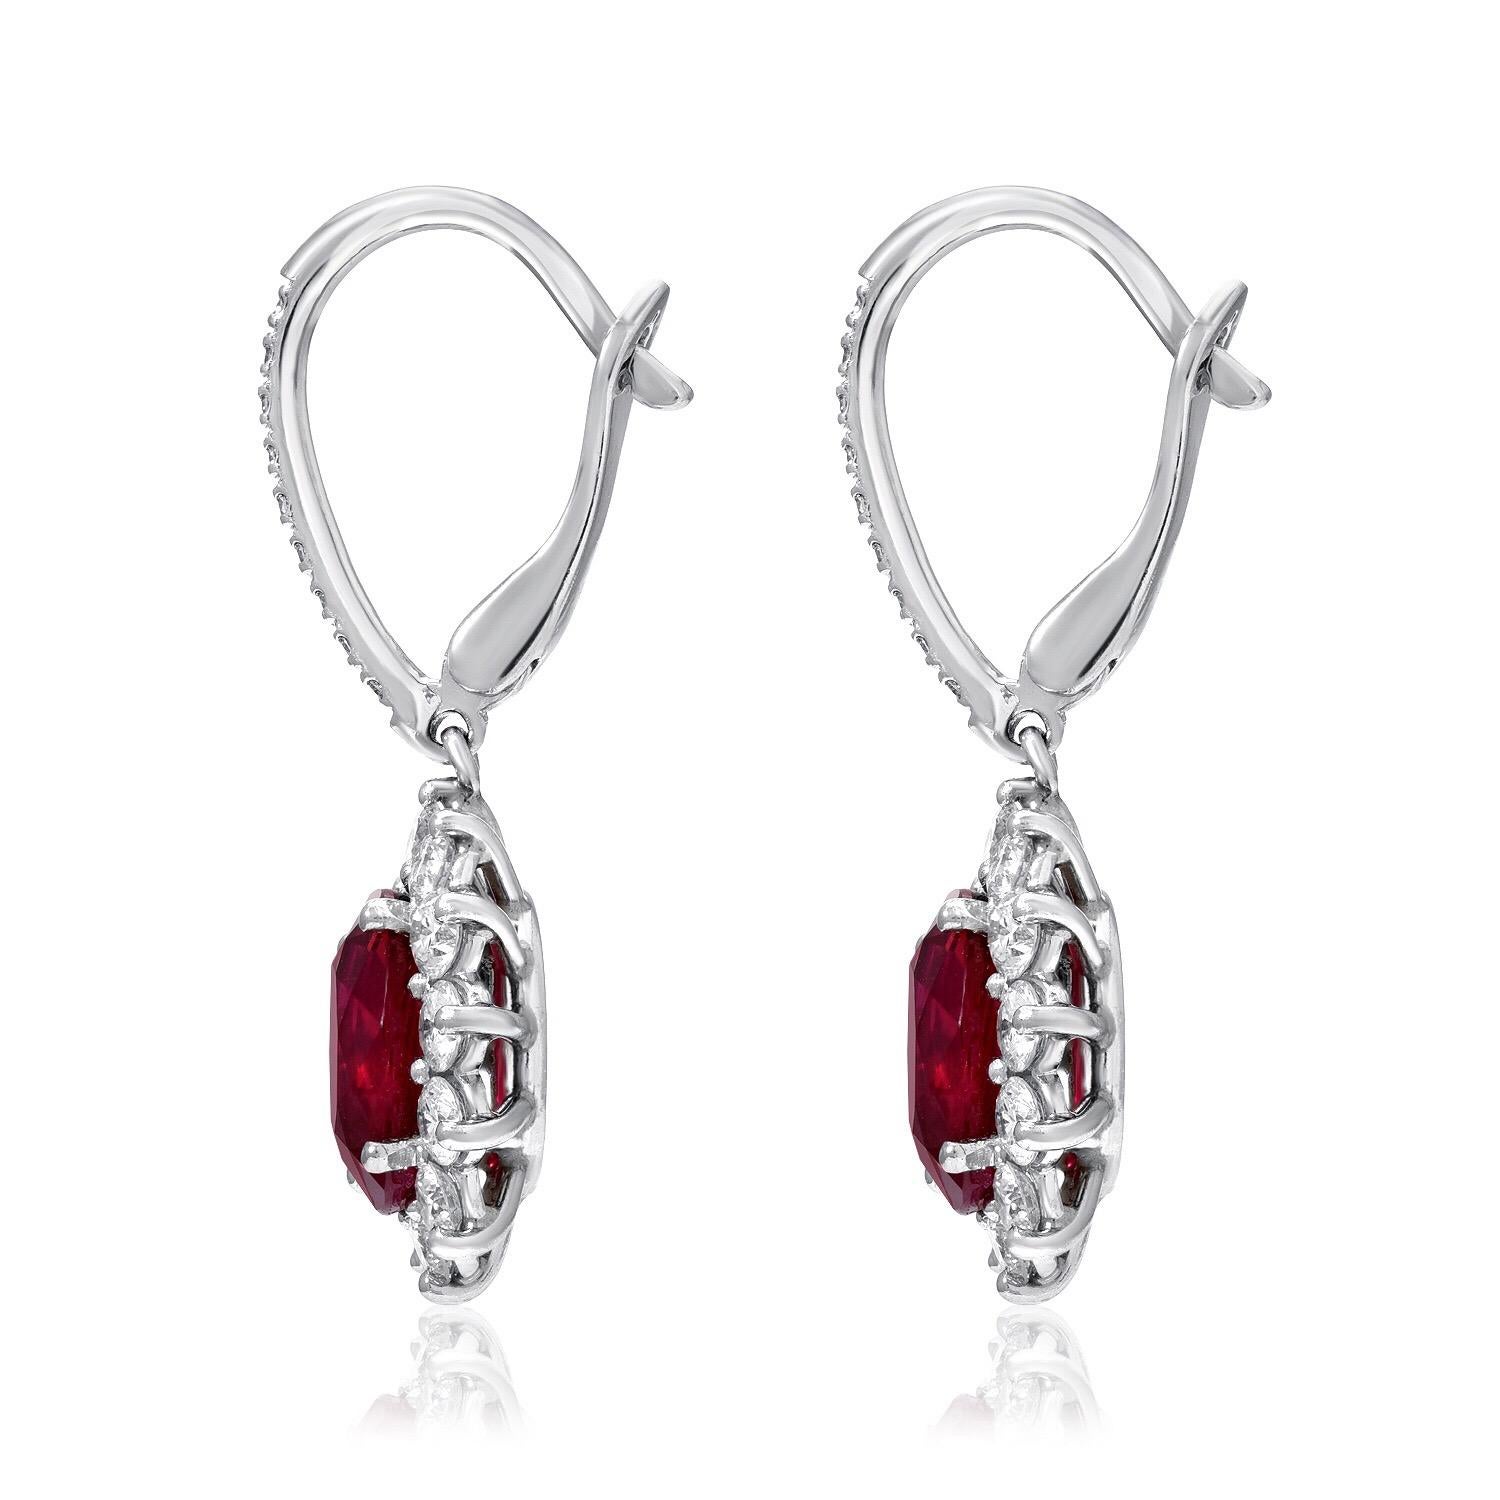 Burma Ruby earrings, exhibiting a sensational oval pair of GIA certified 3.51 carat total Rubies, adorned by a total of 1.21 carats of round brilliant diamonds, in 18K white gold with lever backs.
These lever back drop earrings are approximately 1